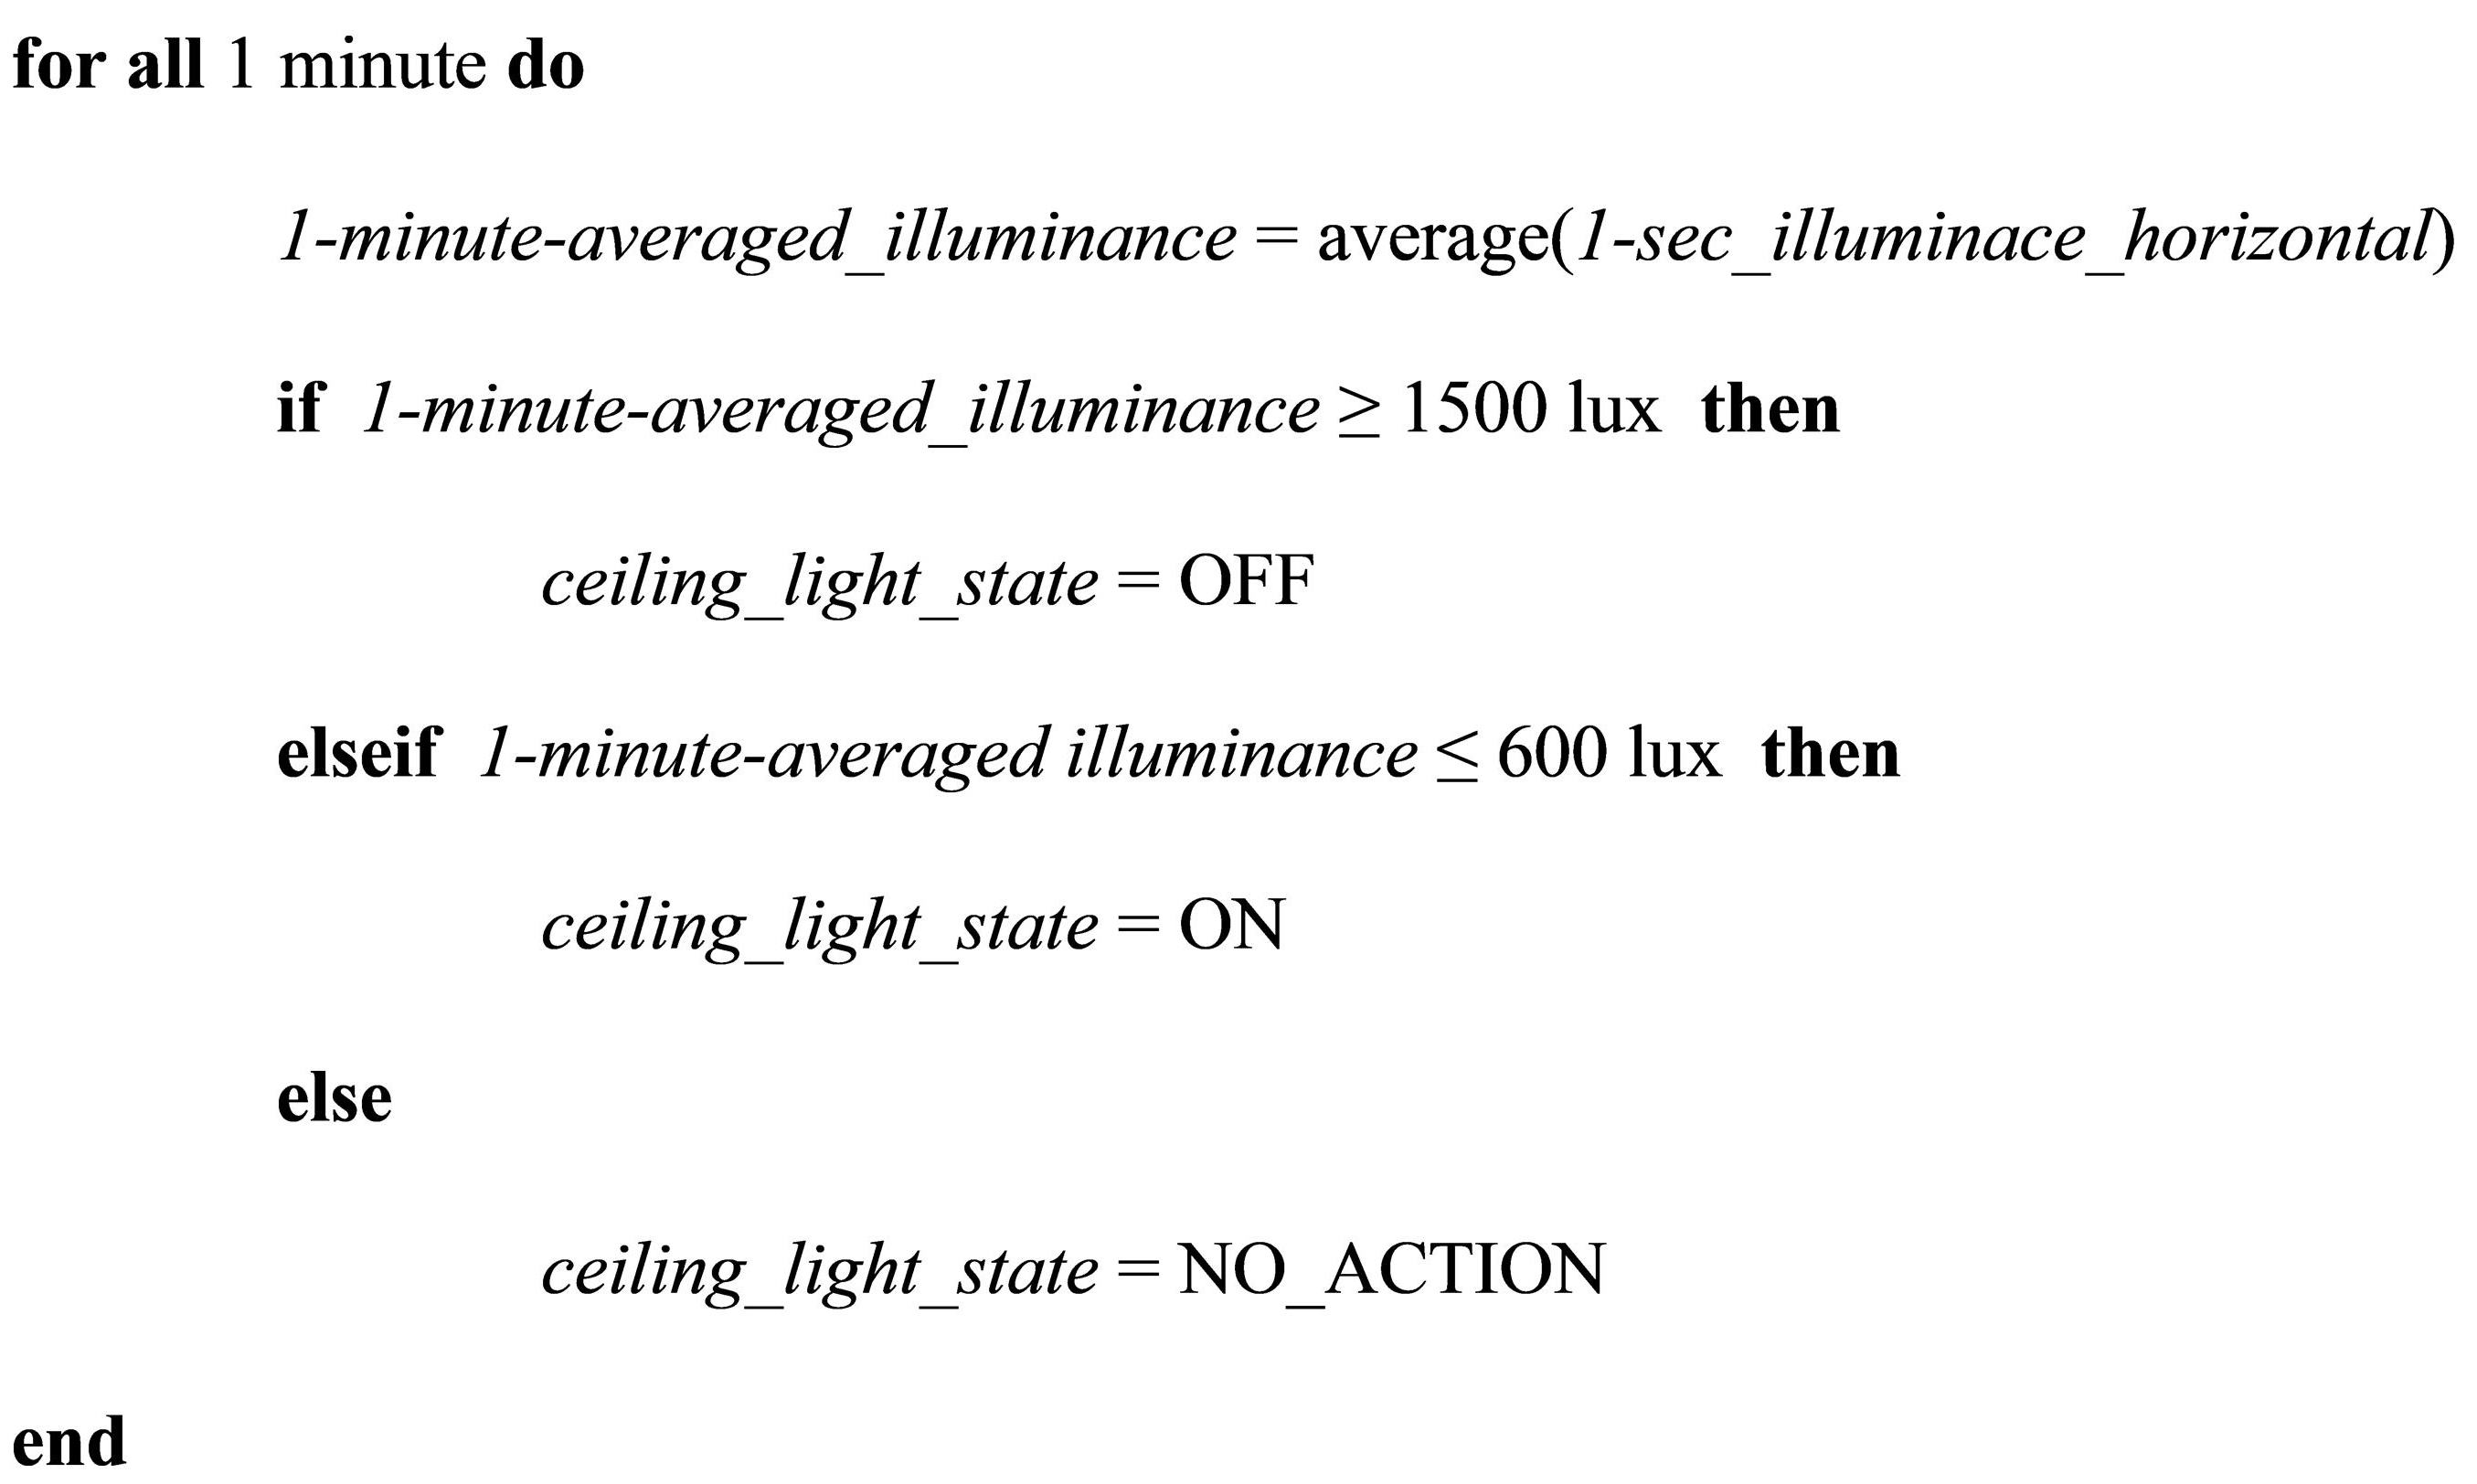 Control strategy for the ceiling lights.